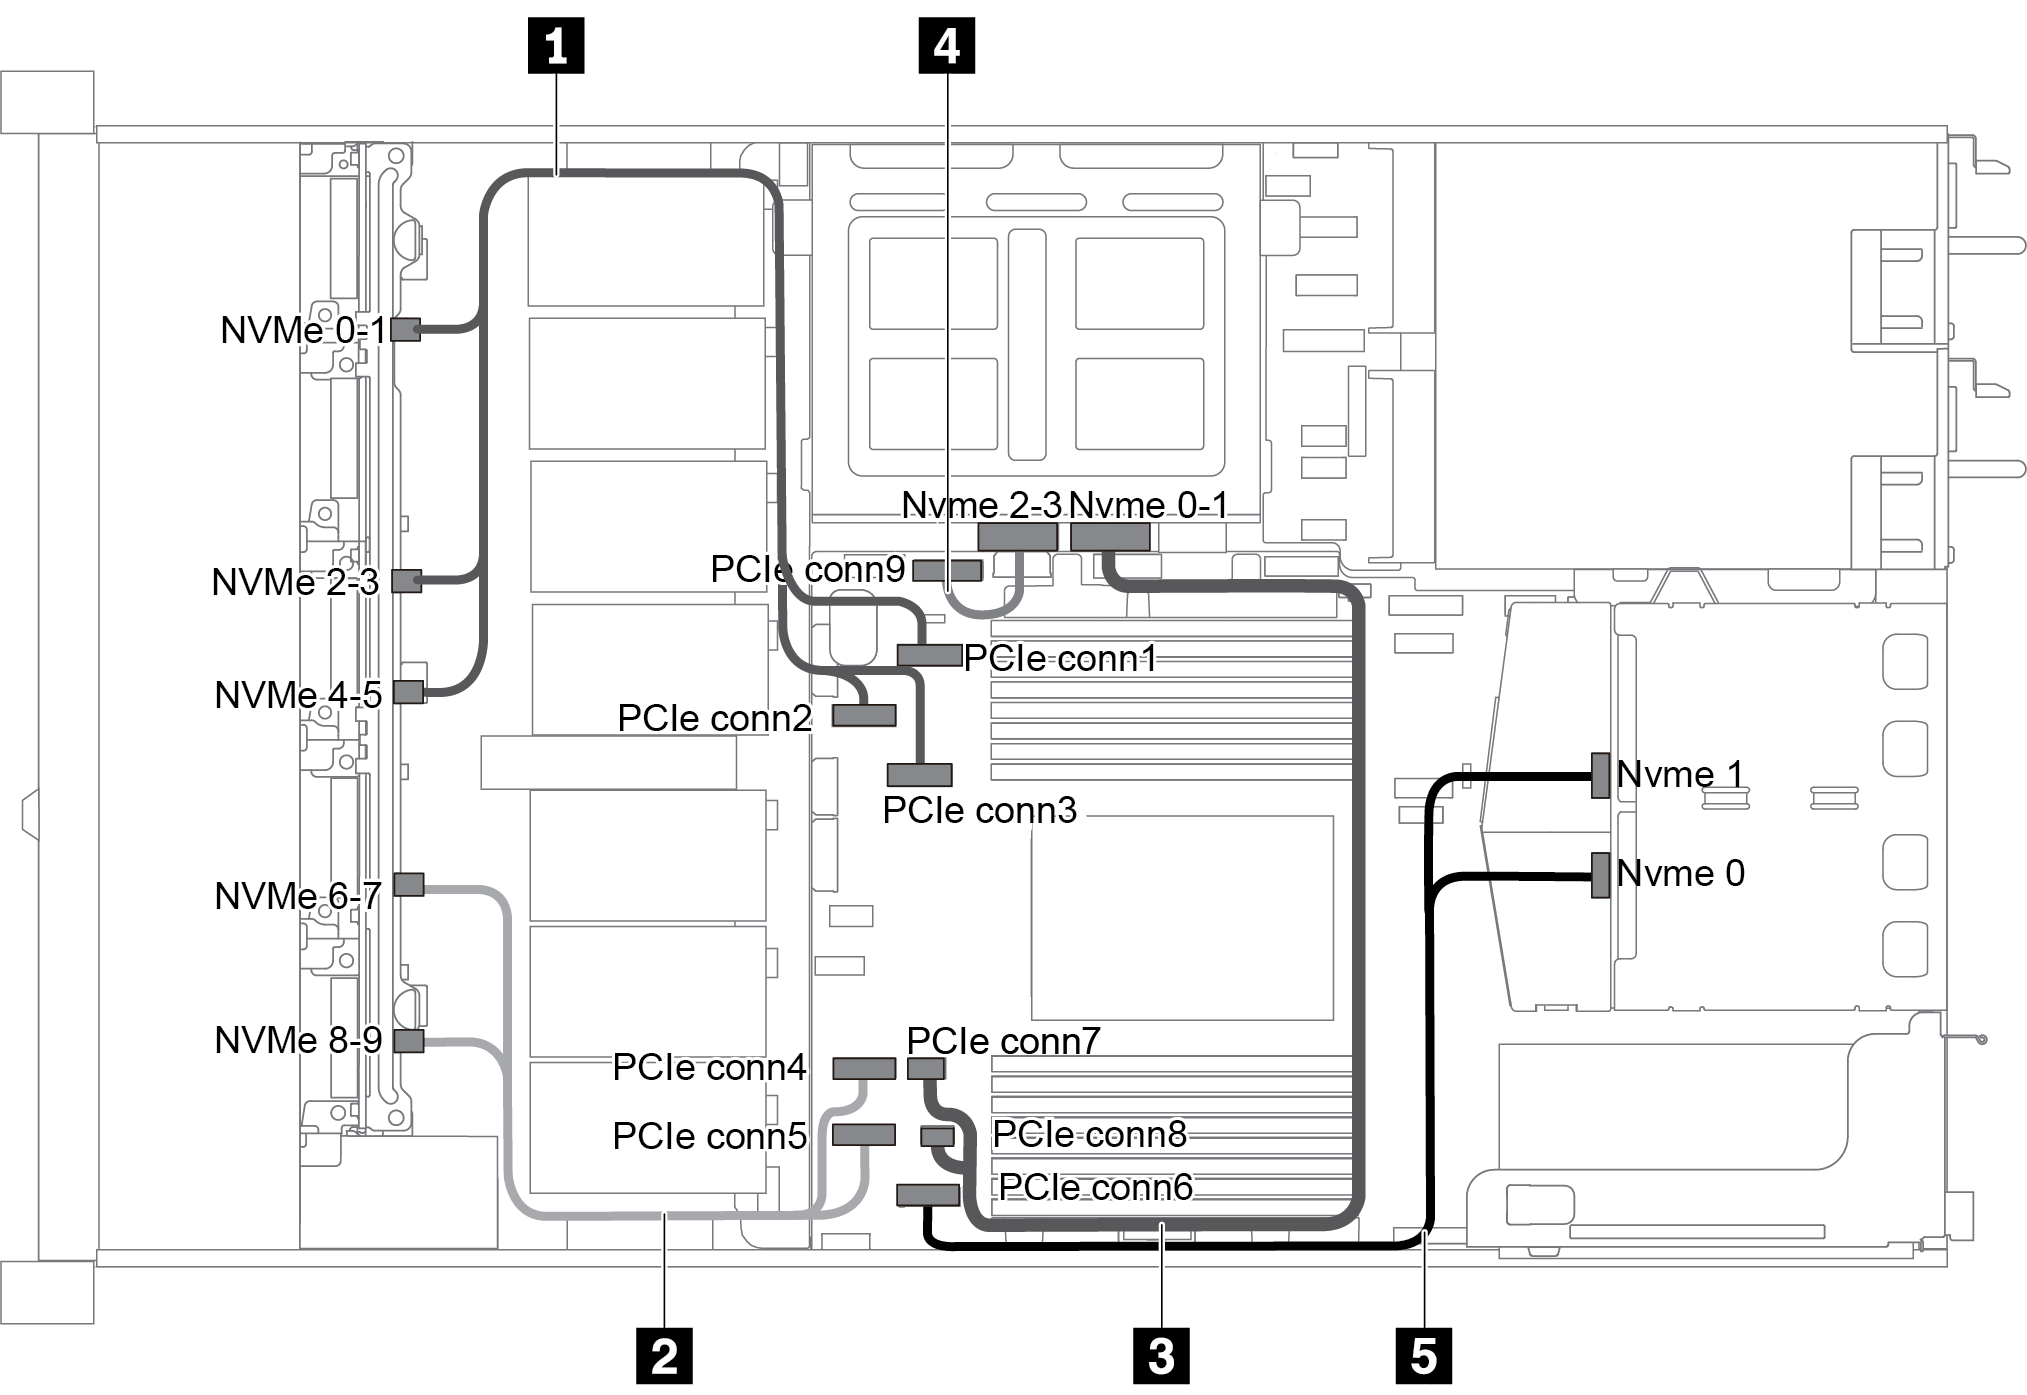 Cable routing for server model with ten 2.5-inch NVMe drives, rear NVMe drive assembly and middle NVMe drive assembly